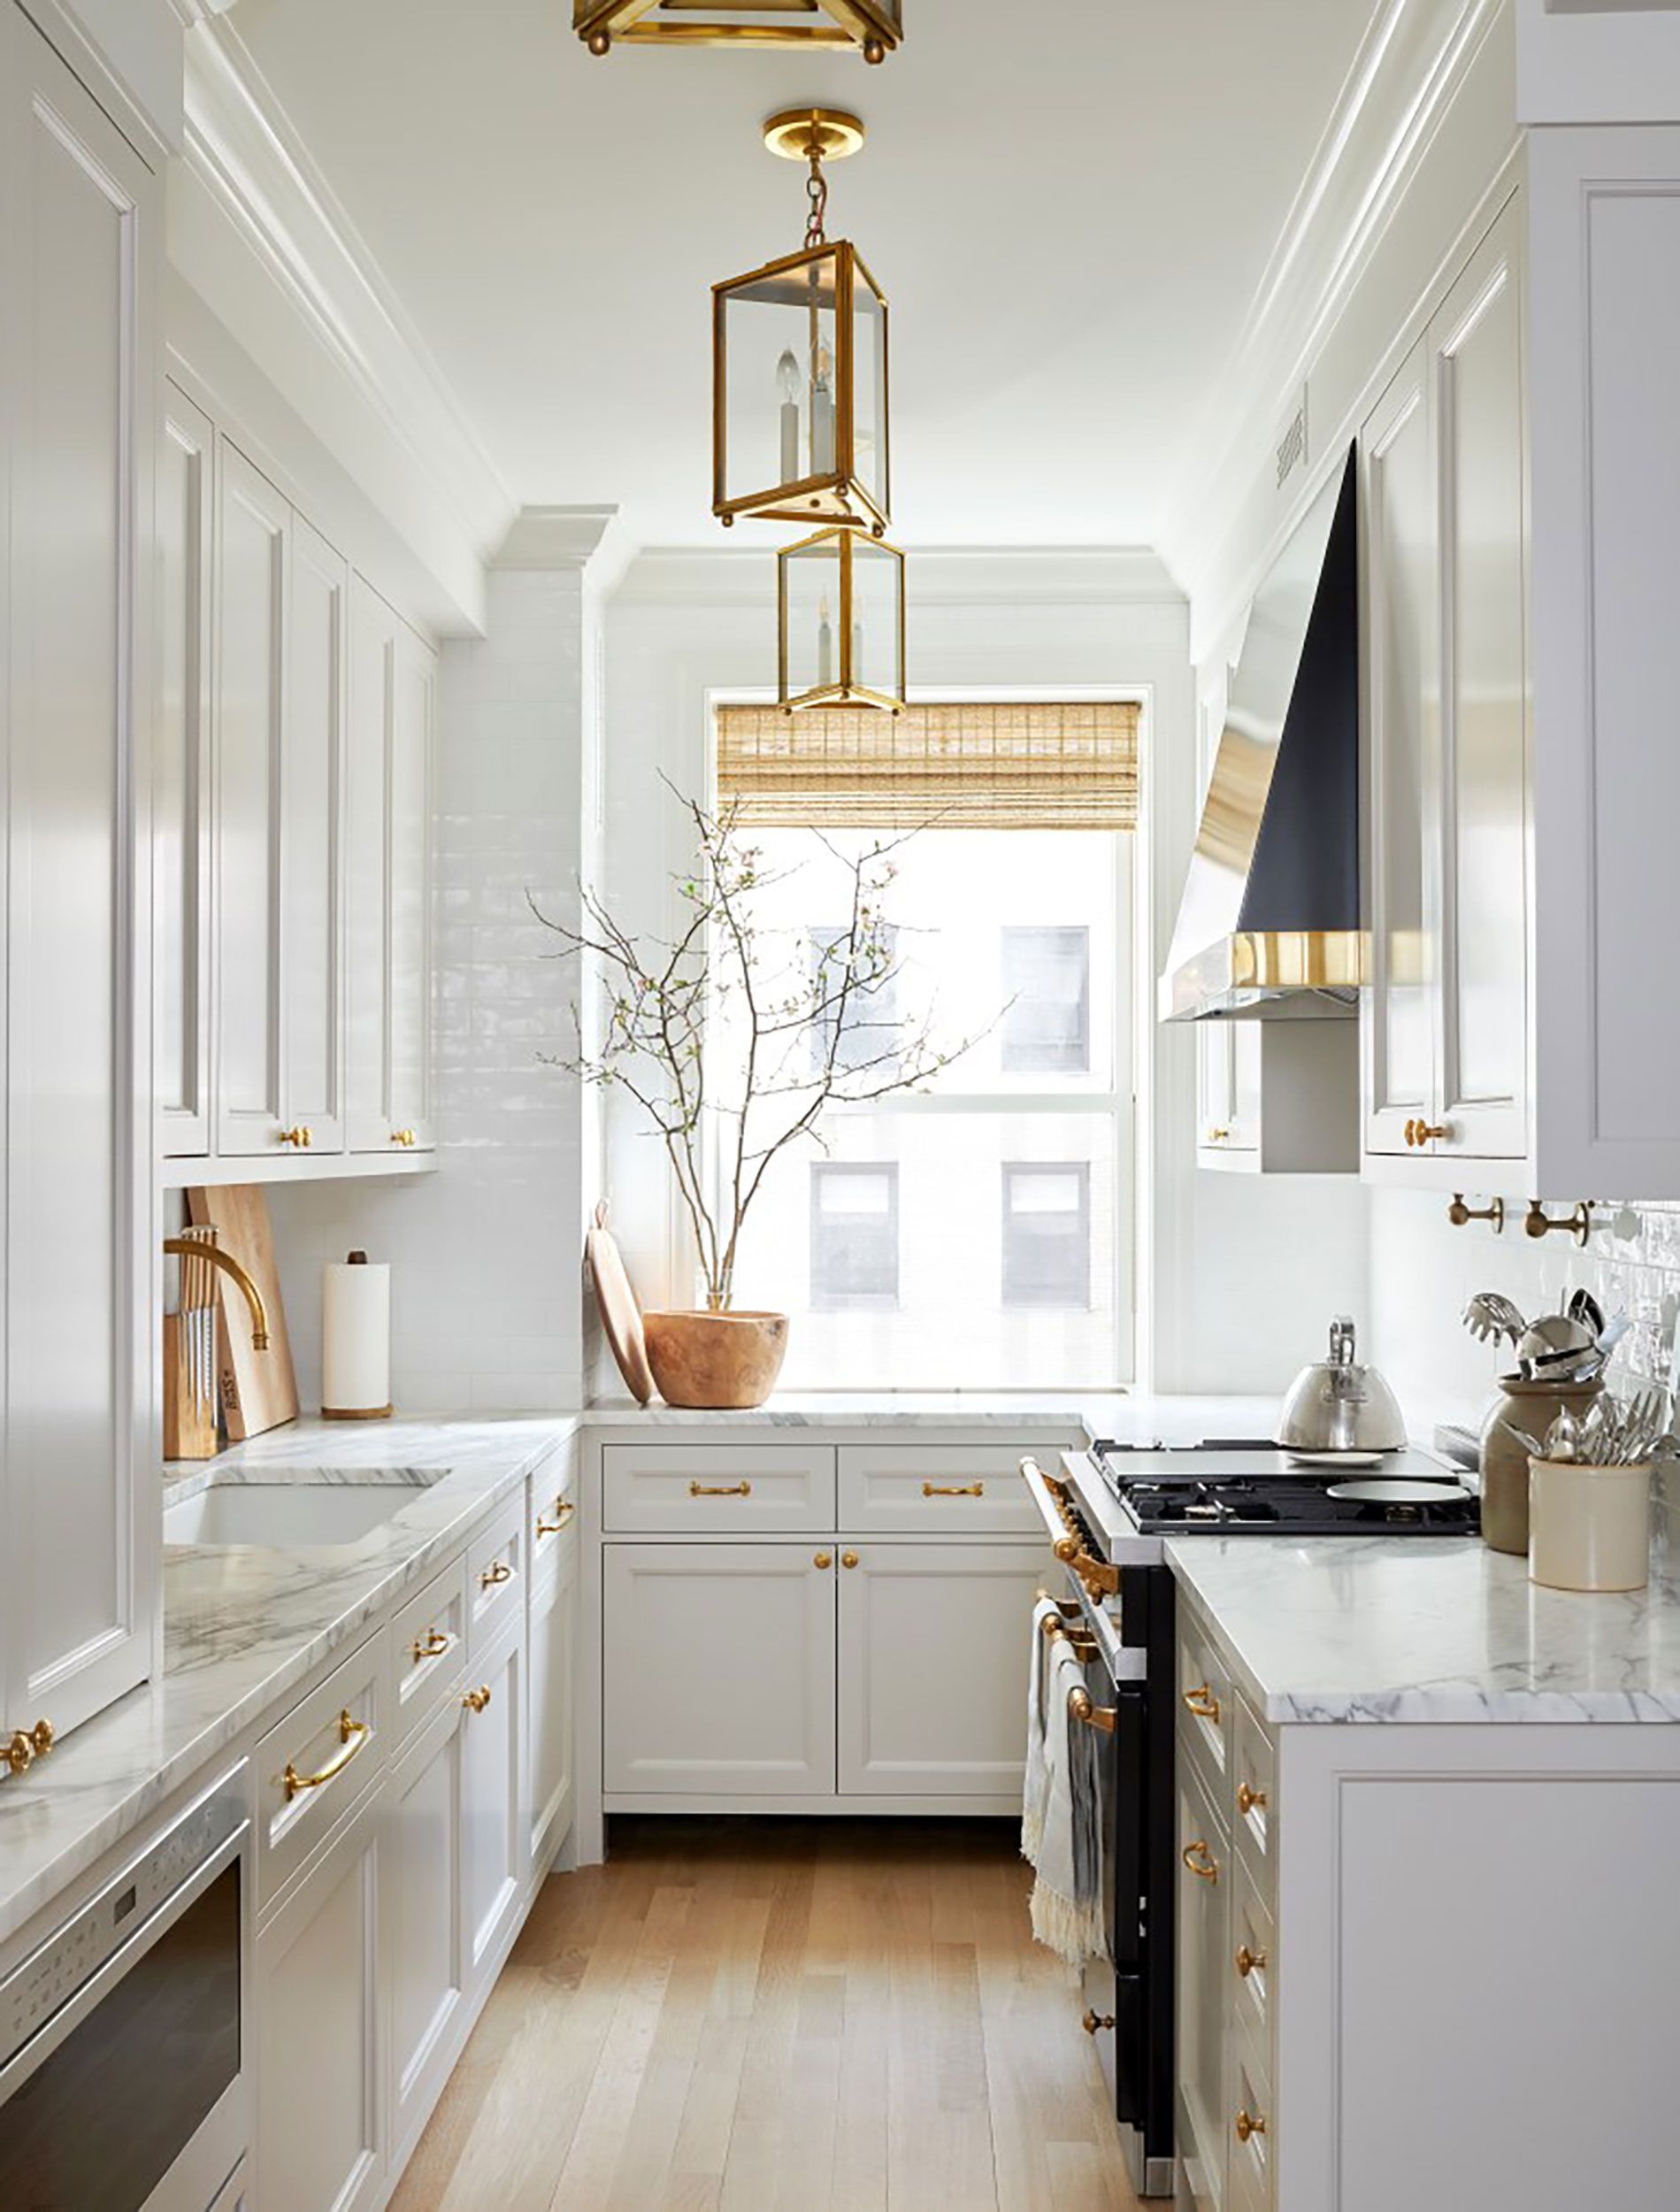 75 Small Kitchen Design Ideas That'll Help You Do More with Less